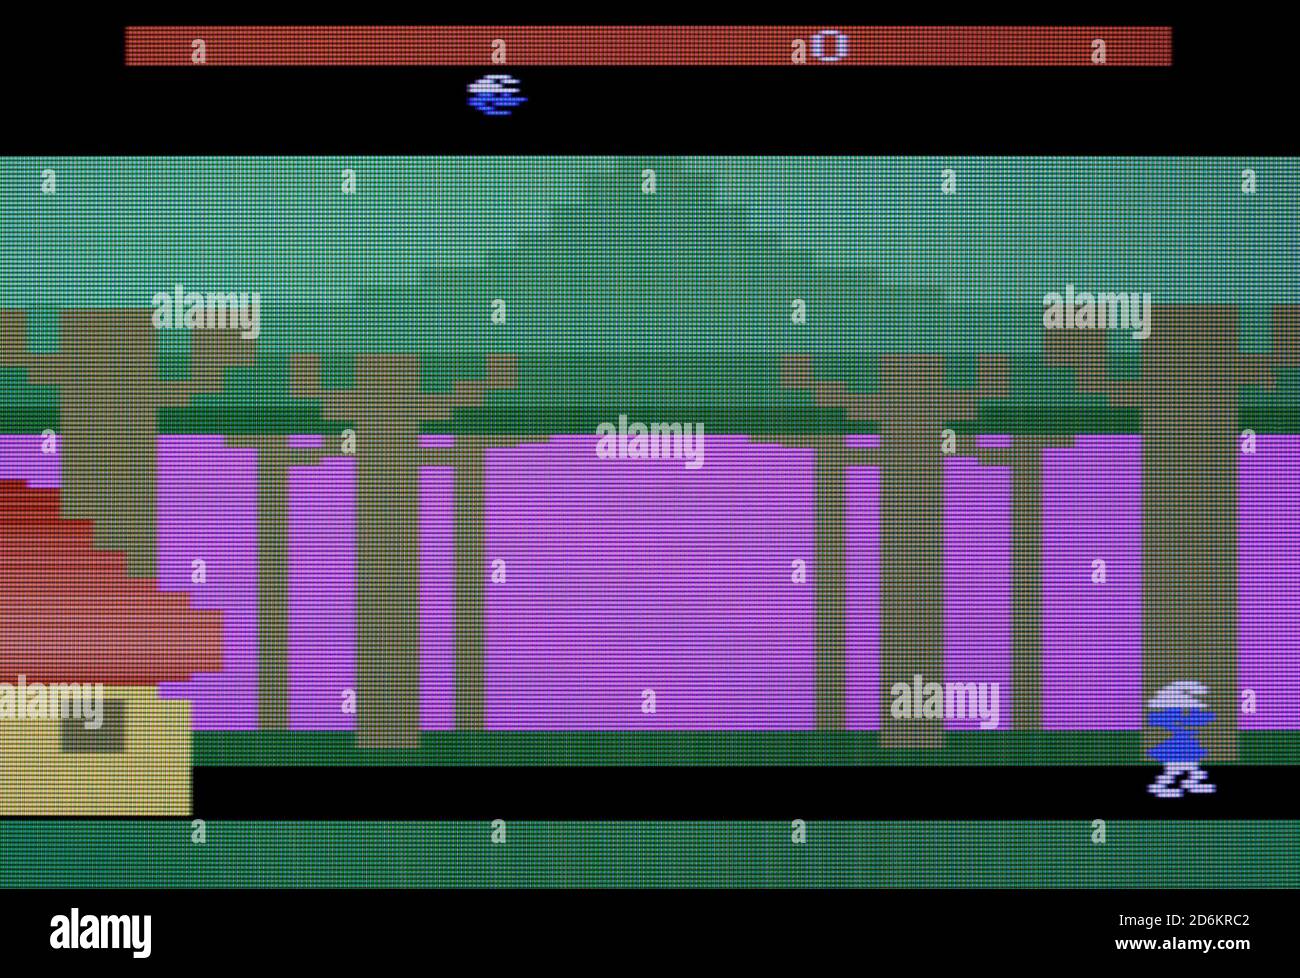 Smurf: Rescue in Gargamel's Castle - Atari 2600 VCS Videogame - Editorial use only Stock Photo